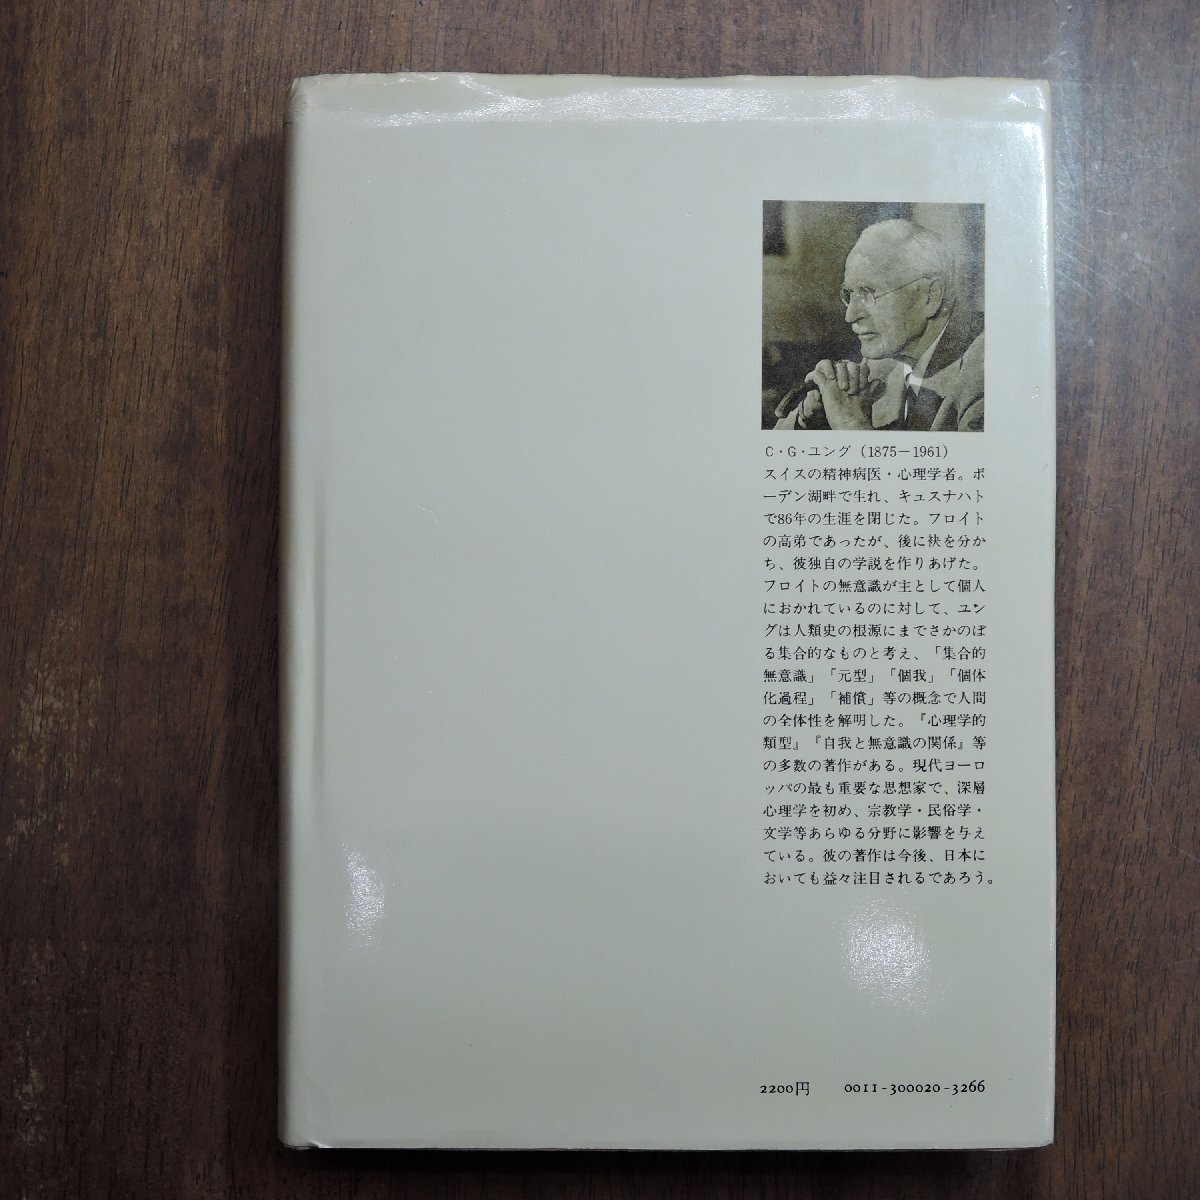 * psychology .. gold .II C.G. jung work Ikeda . one * sickle rice field road raw translation humanities paper . regular price 2200 jpy 1976 year the first version 